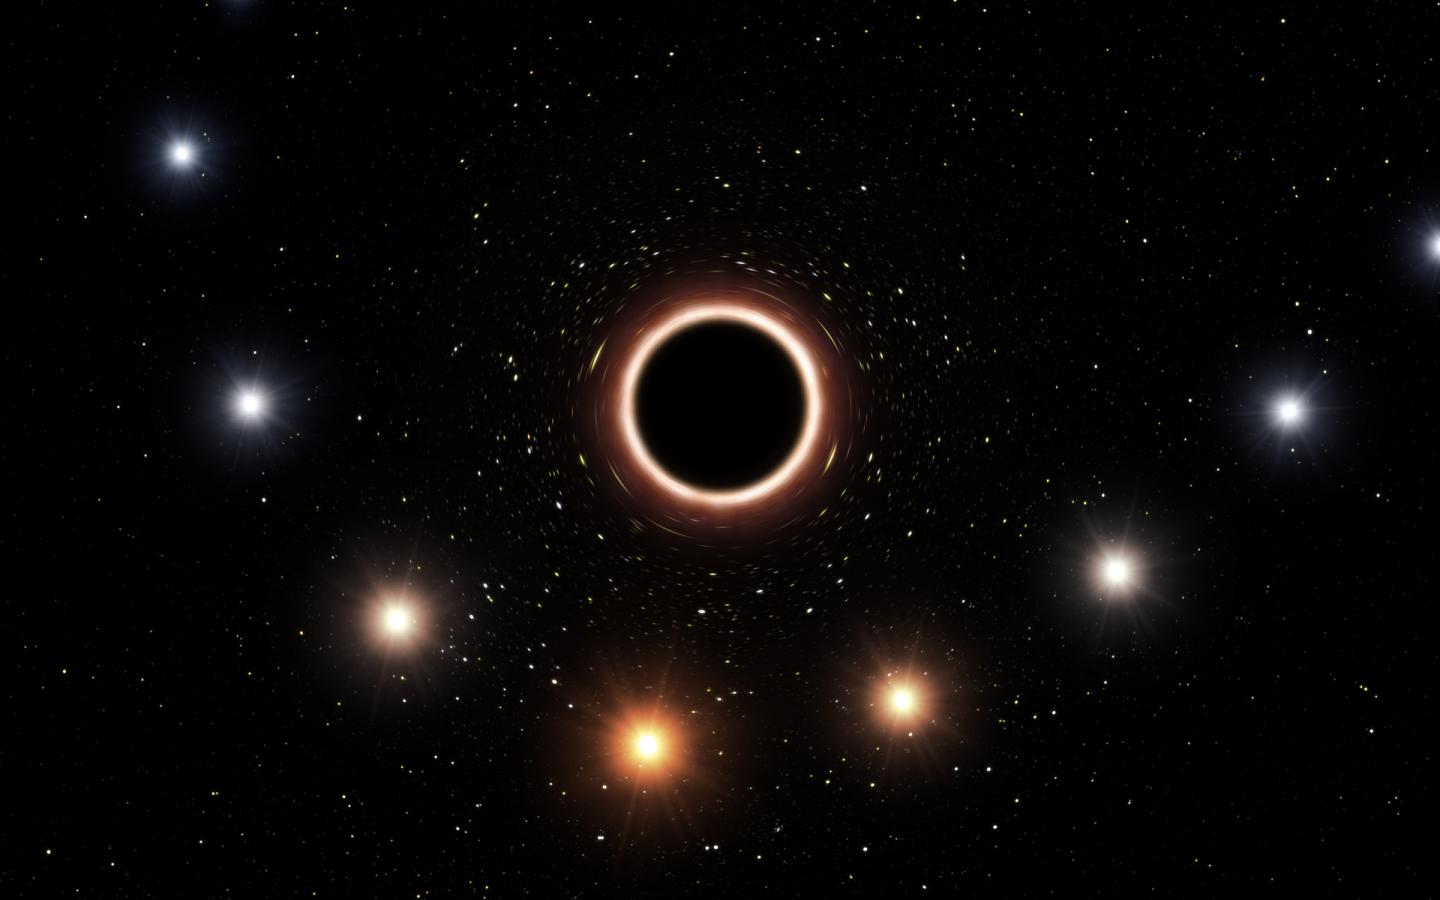 Artist's Impression of S2 Passing Supermassive Black Hole at Center of Milky Way